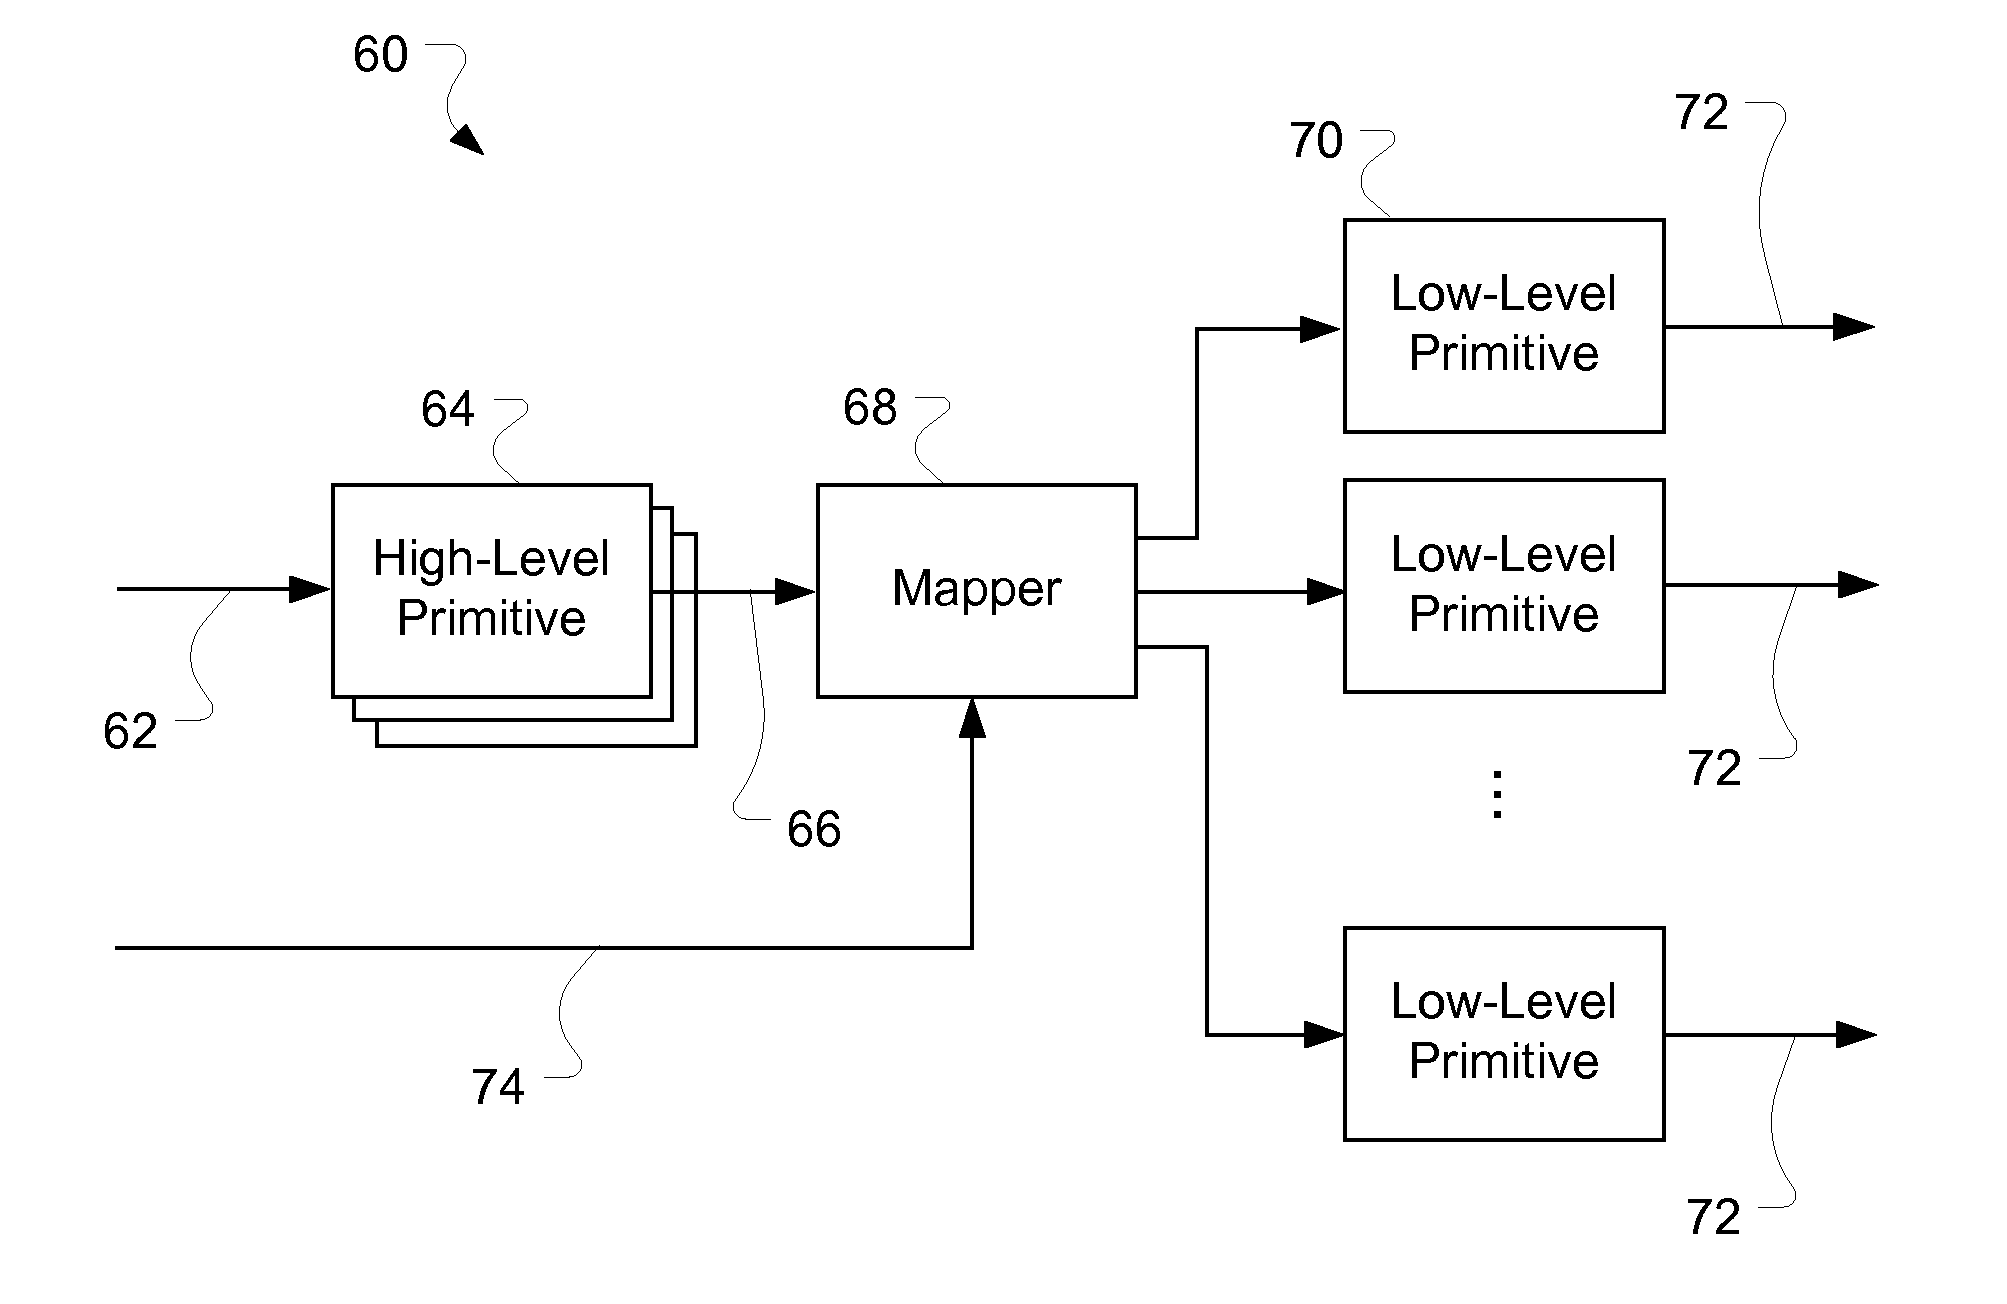 Variable primitive mapping for a robotic crawler